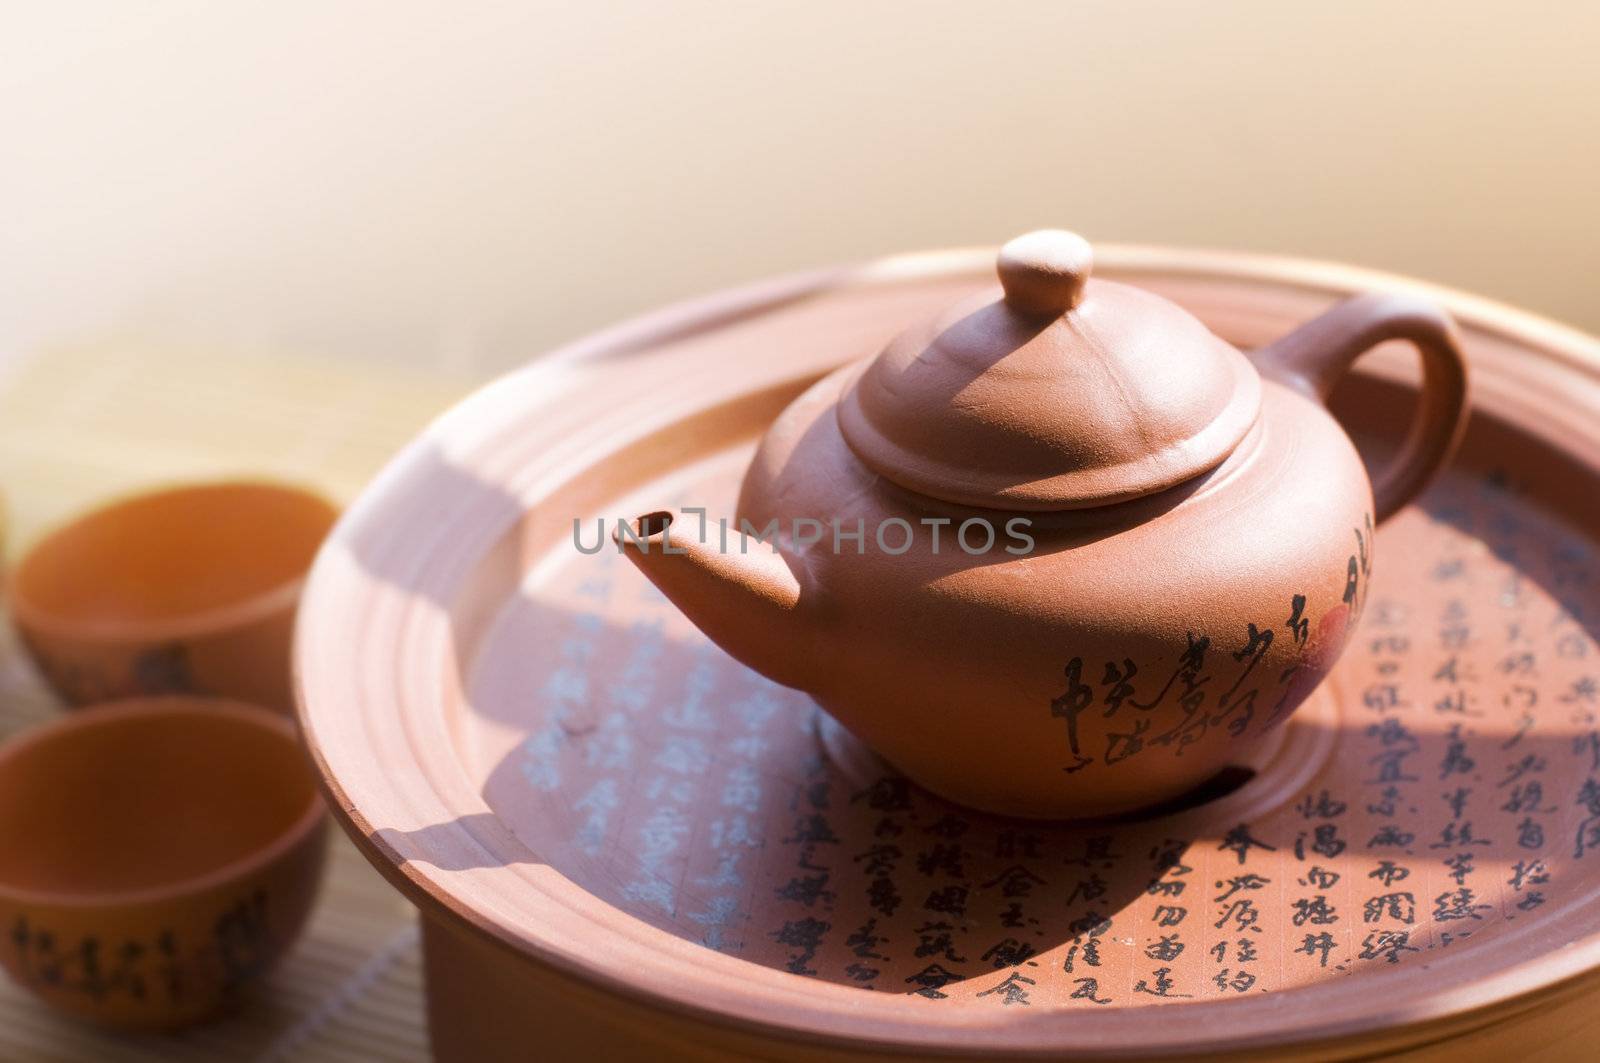 Chinese ceramic teapot and cups. The Chinese word on the pot is a poem.